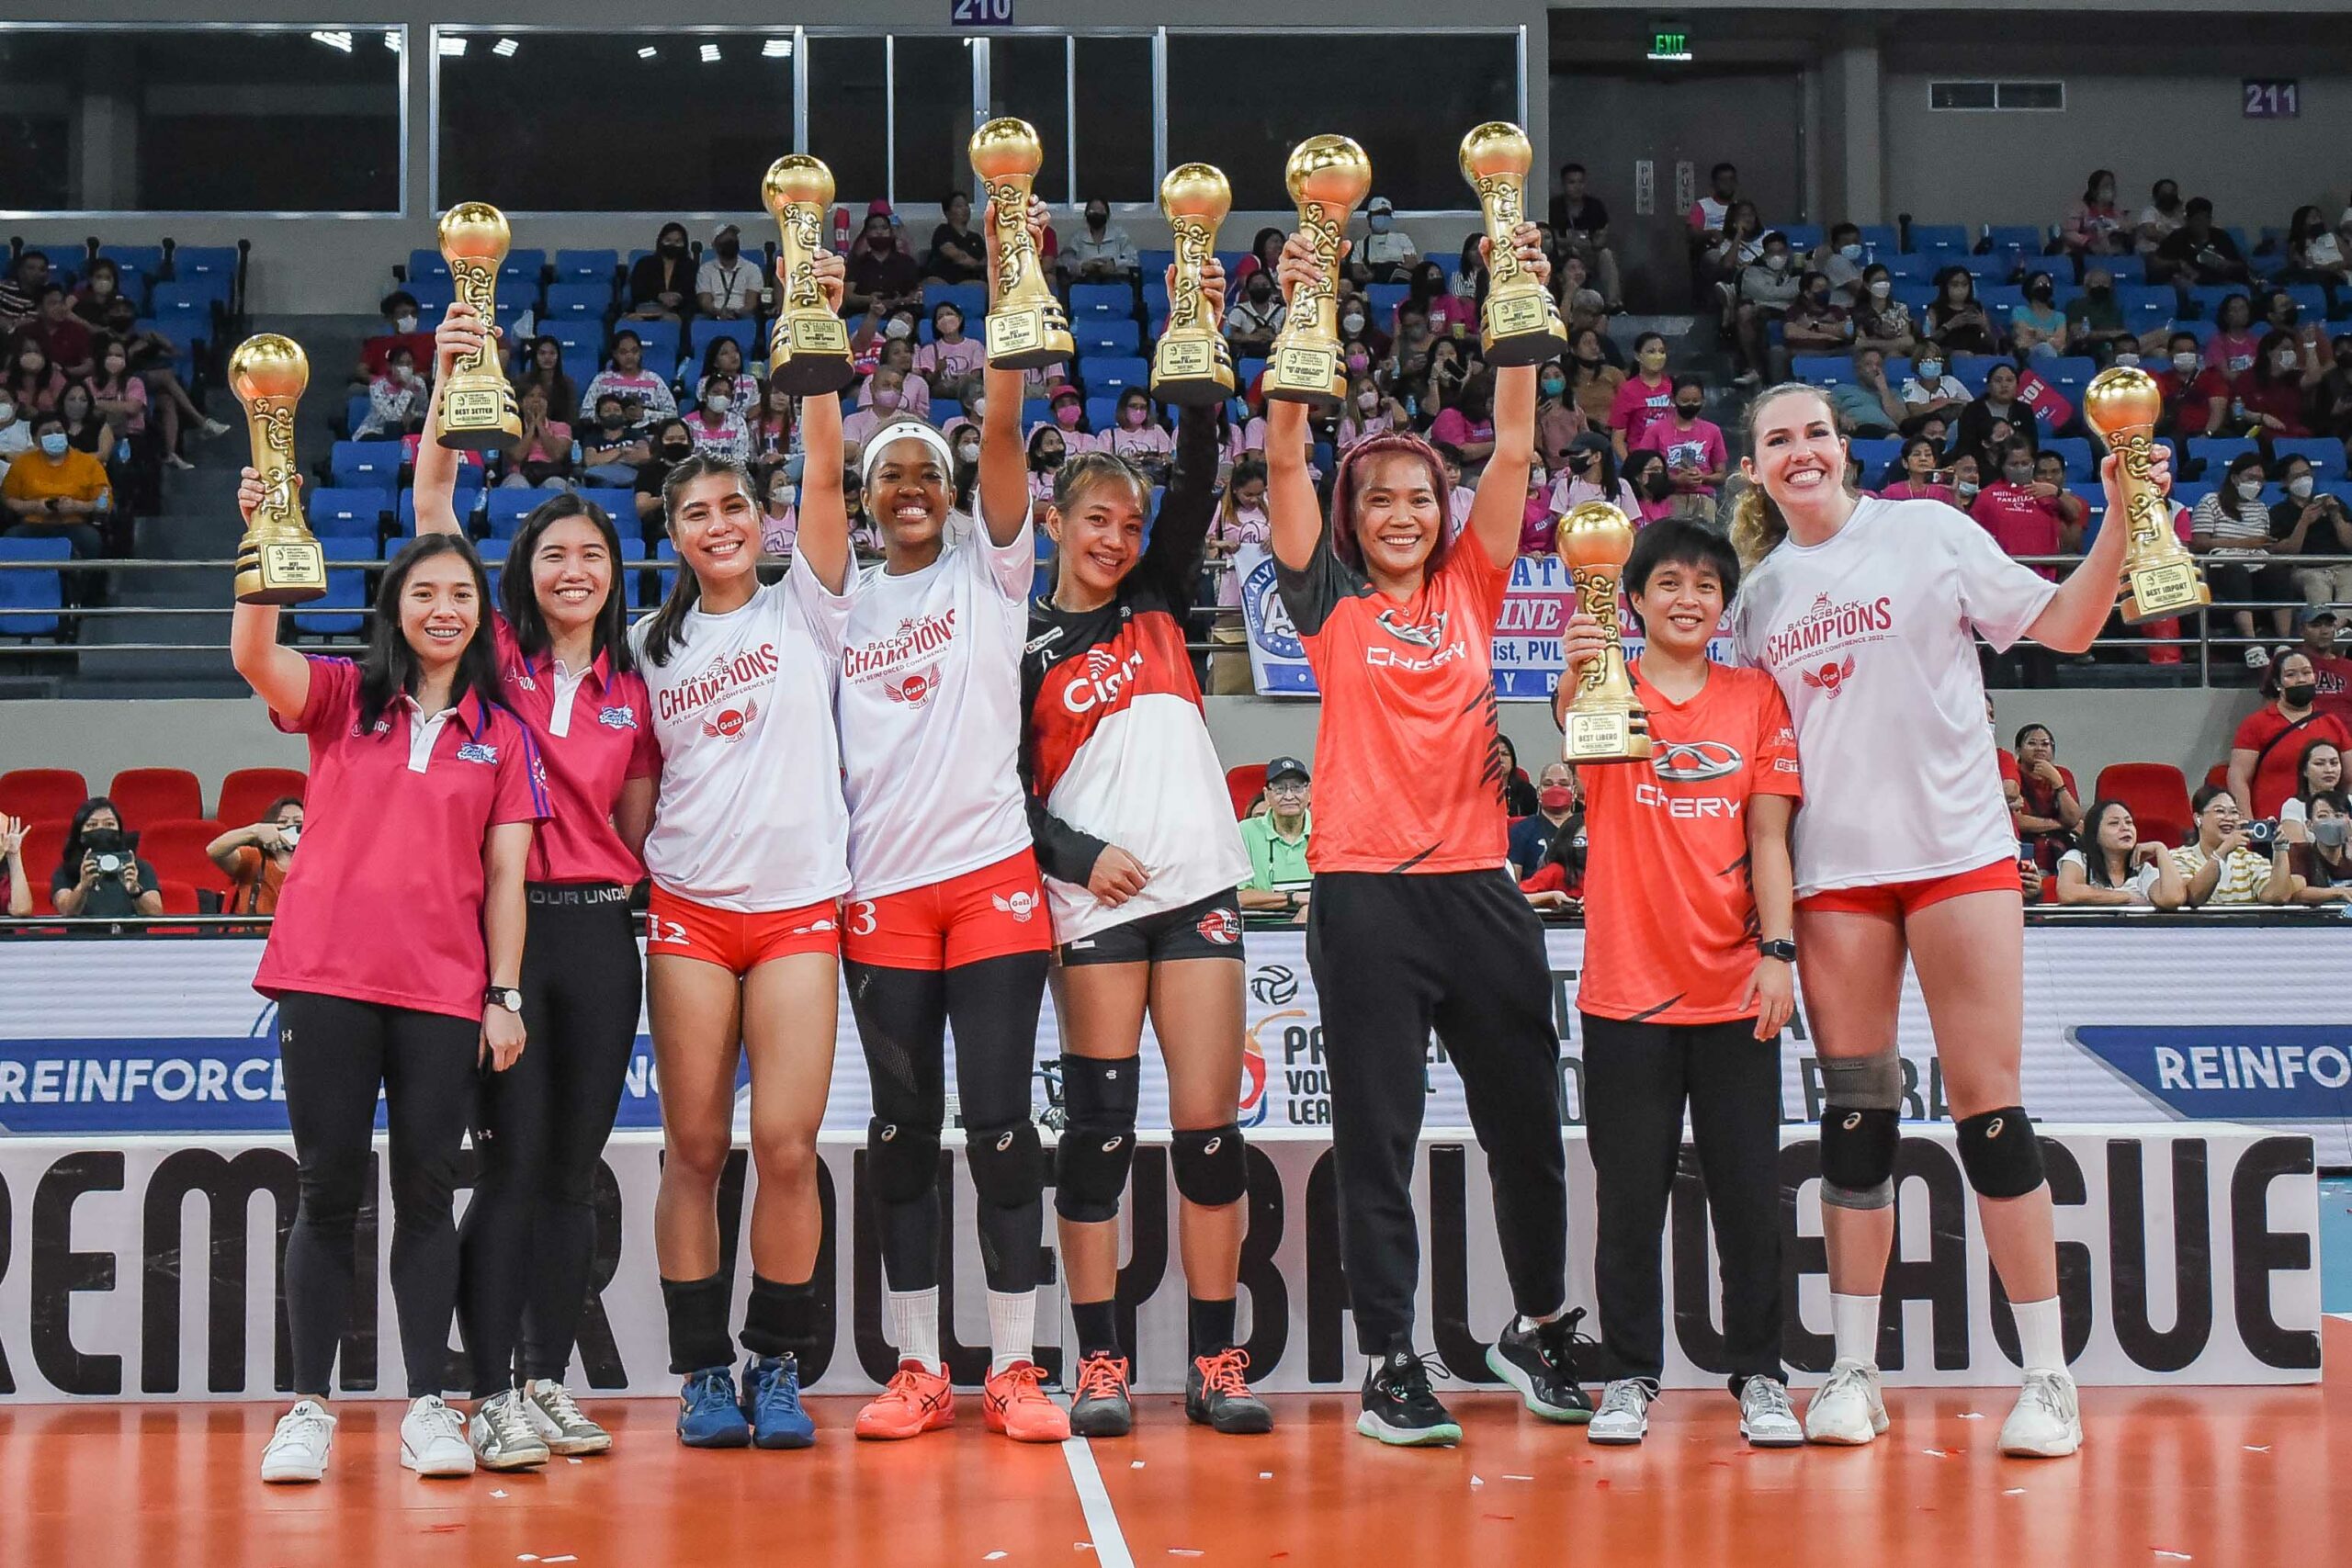 PVL-Reinforced-Petrogazz-vs.-Cignal-G2-0770-scaled Mylene Paat gets well-deserved PVL Reinforced MVP crown News PVL Volleyball  - philippine sports news